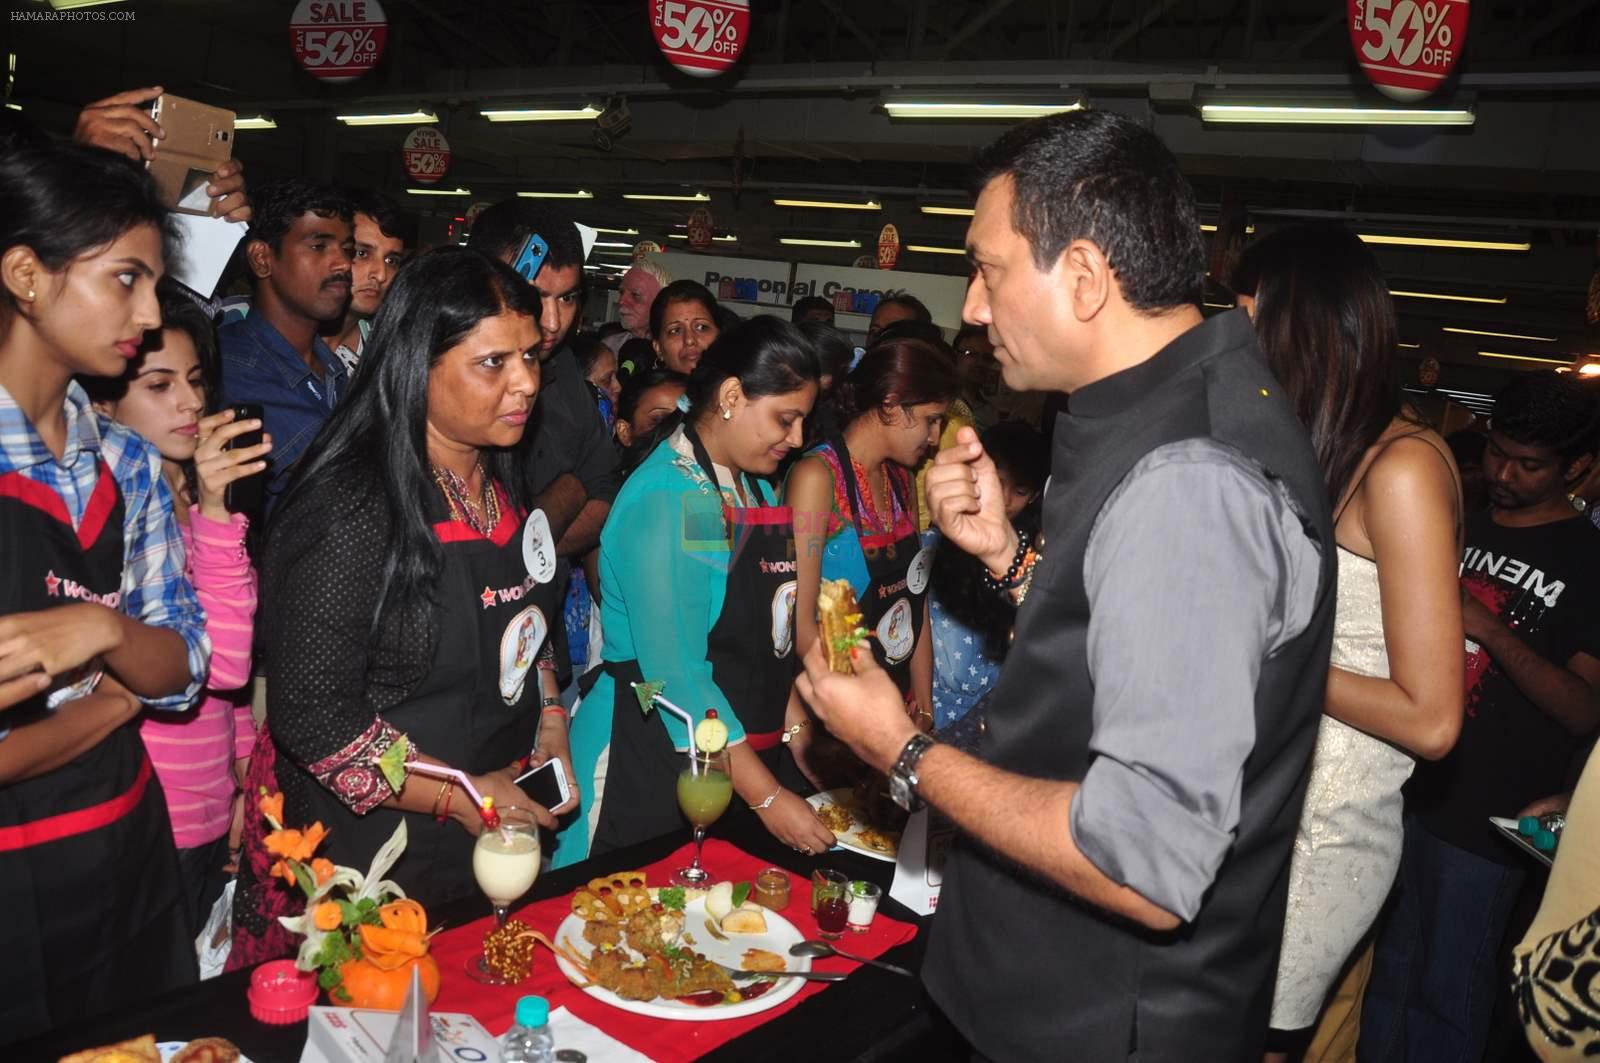 Sanjeev Kapoor at hypercity cookery event on 13th June 2015